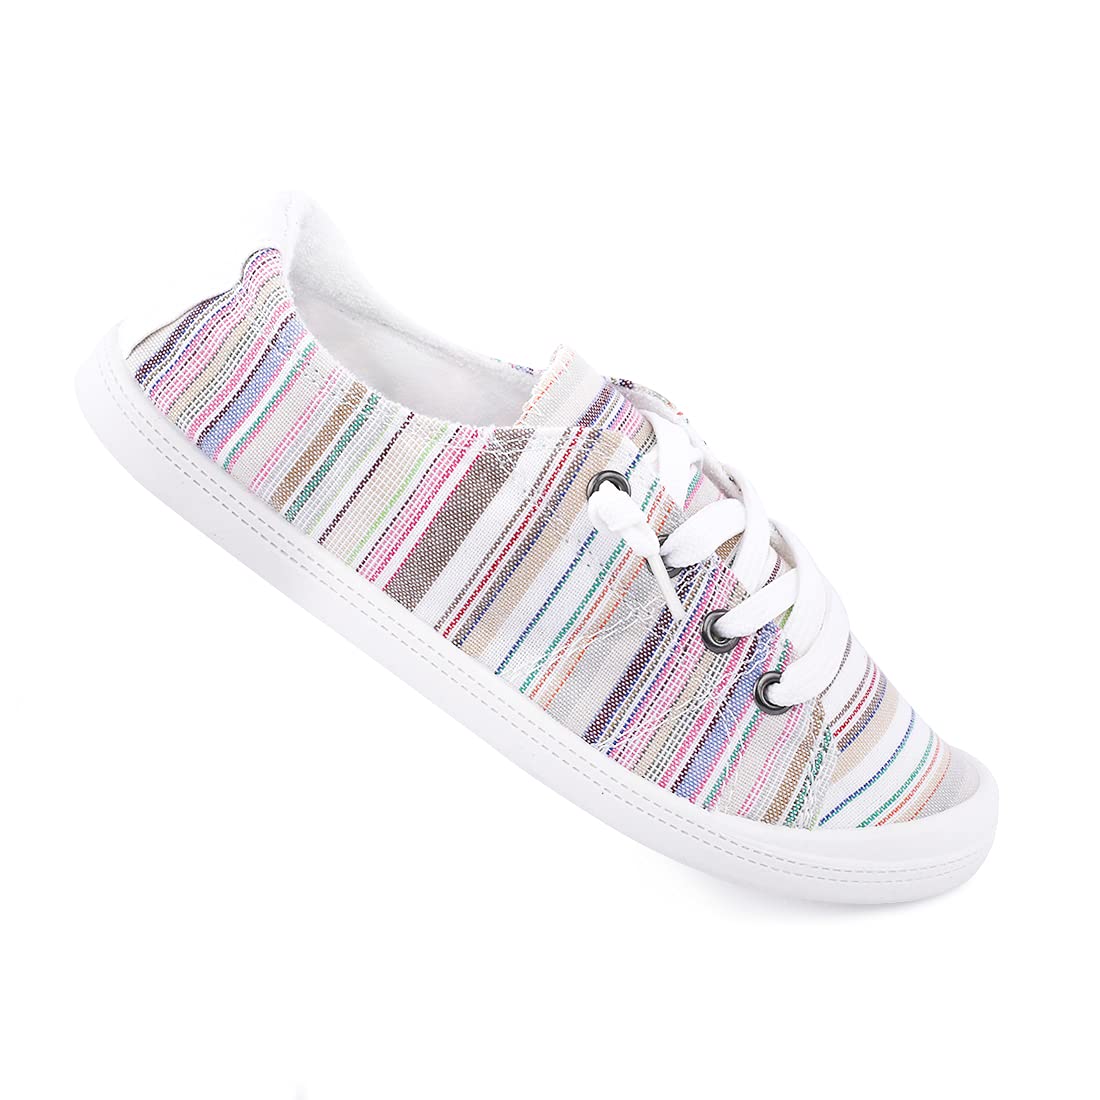 Women's Slip On Canvas Sneaker Low Top Casual Walking Shoes Classic Comfort Flat Fashion Sneakers